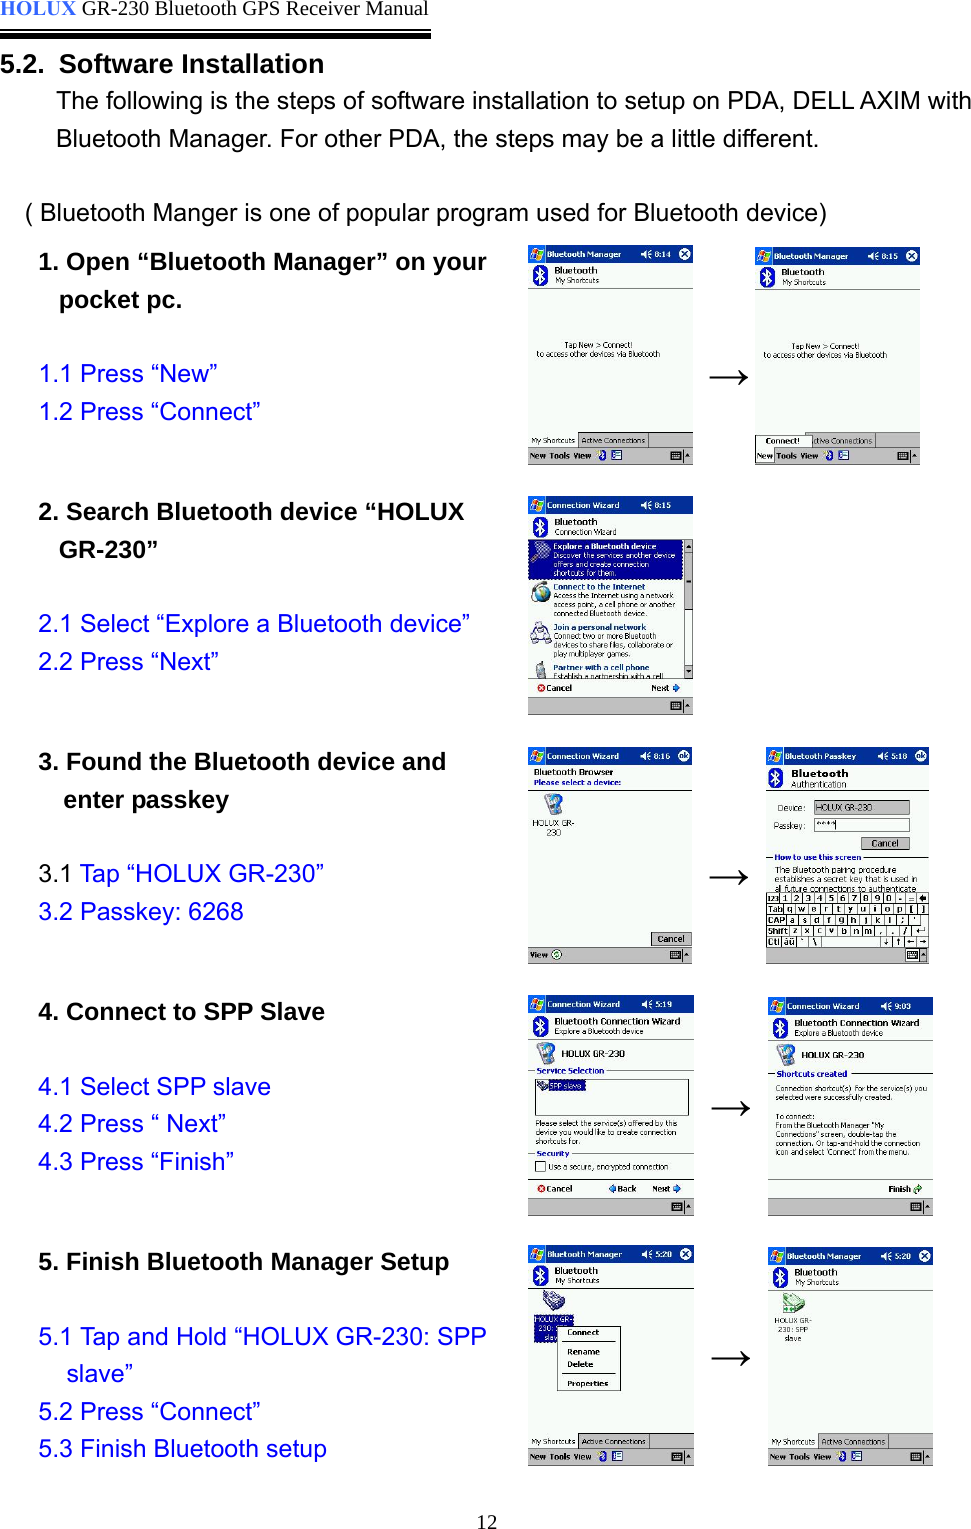  HOLUX GR-230 Bluetooth GPS Receiver Manual   125.2. Software Installation The following is the steps of software installation to setup on PDA, DELL AXIM with Bluetooth Manager. For other PDA, the steps may be a little different.  ( Bluetooth Manger is one of popular program used for Bluetooth device) 1. Open “Bluetooth Manager” on your pocket pc.  1.1 Press “New”   1.2 Press “Connect”        2. Search Bluetooth device “HOLUX GR-230”  2.1 Select “Explore a Bluetooth device” 2.2 Press “Next”     3. Found the Bluetooth device and enter passkey  3.1 Tap “HOLUX GR-230” 3.2 Passkey: 6268        4. Connect to SPP Slave  4.1 Select SPP slave 4.2 Press “ Next” 4.3 Press “Finish”         5. Finish Bluetooth Manager Setup  5.1 Tap and Hold “HOLUX GR-230: SPP slave” 5.2 Press “Connect” 5.3 Finish Bluetooth setup       → → → →  